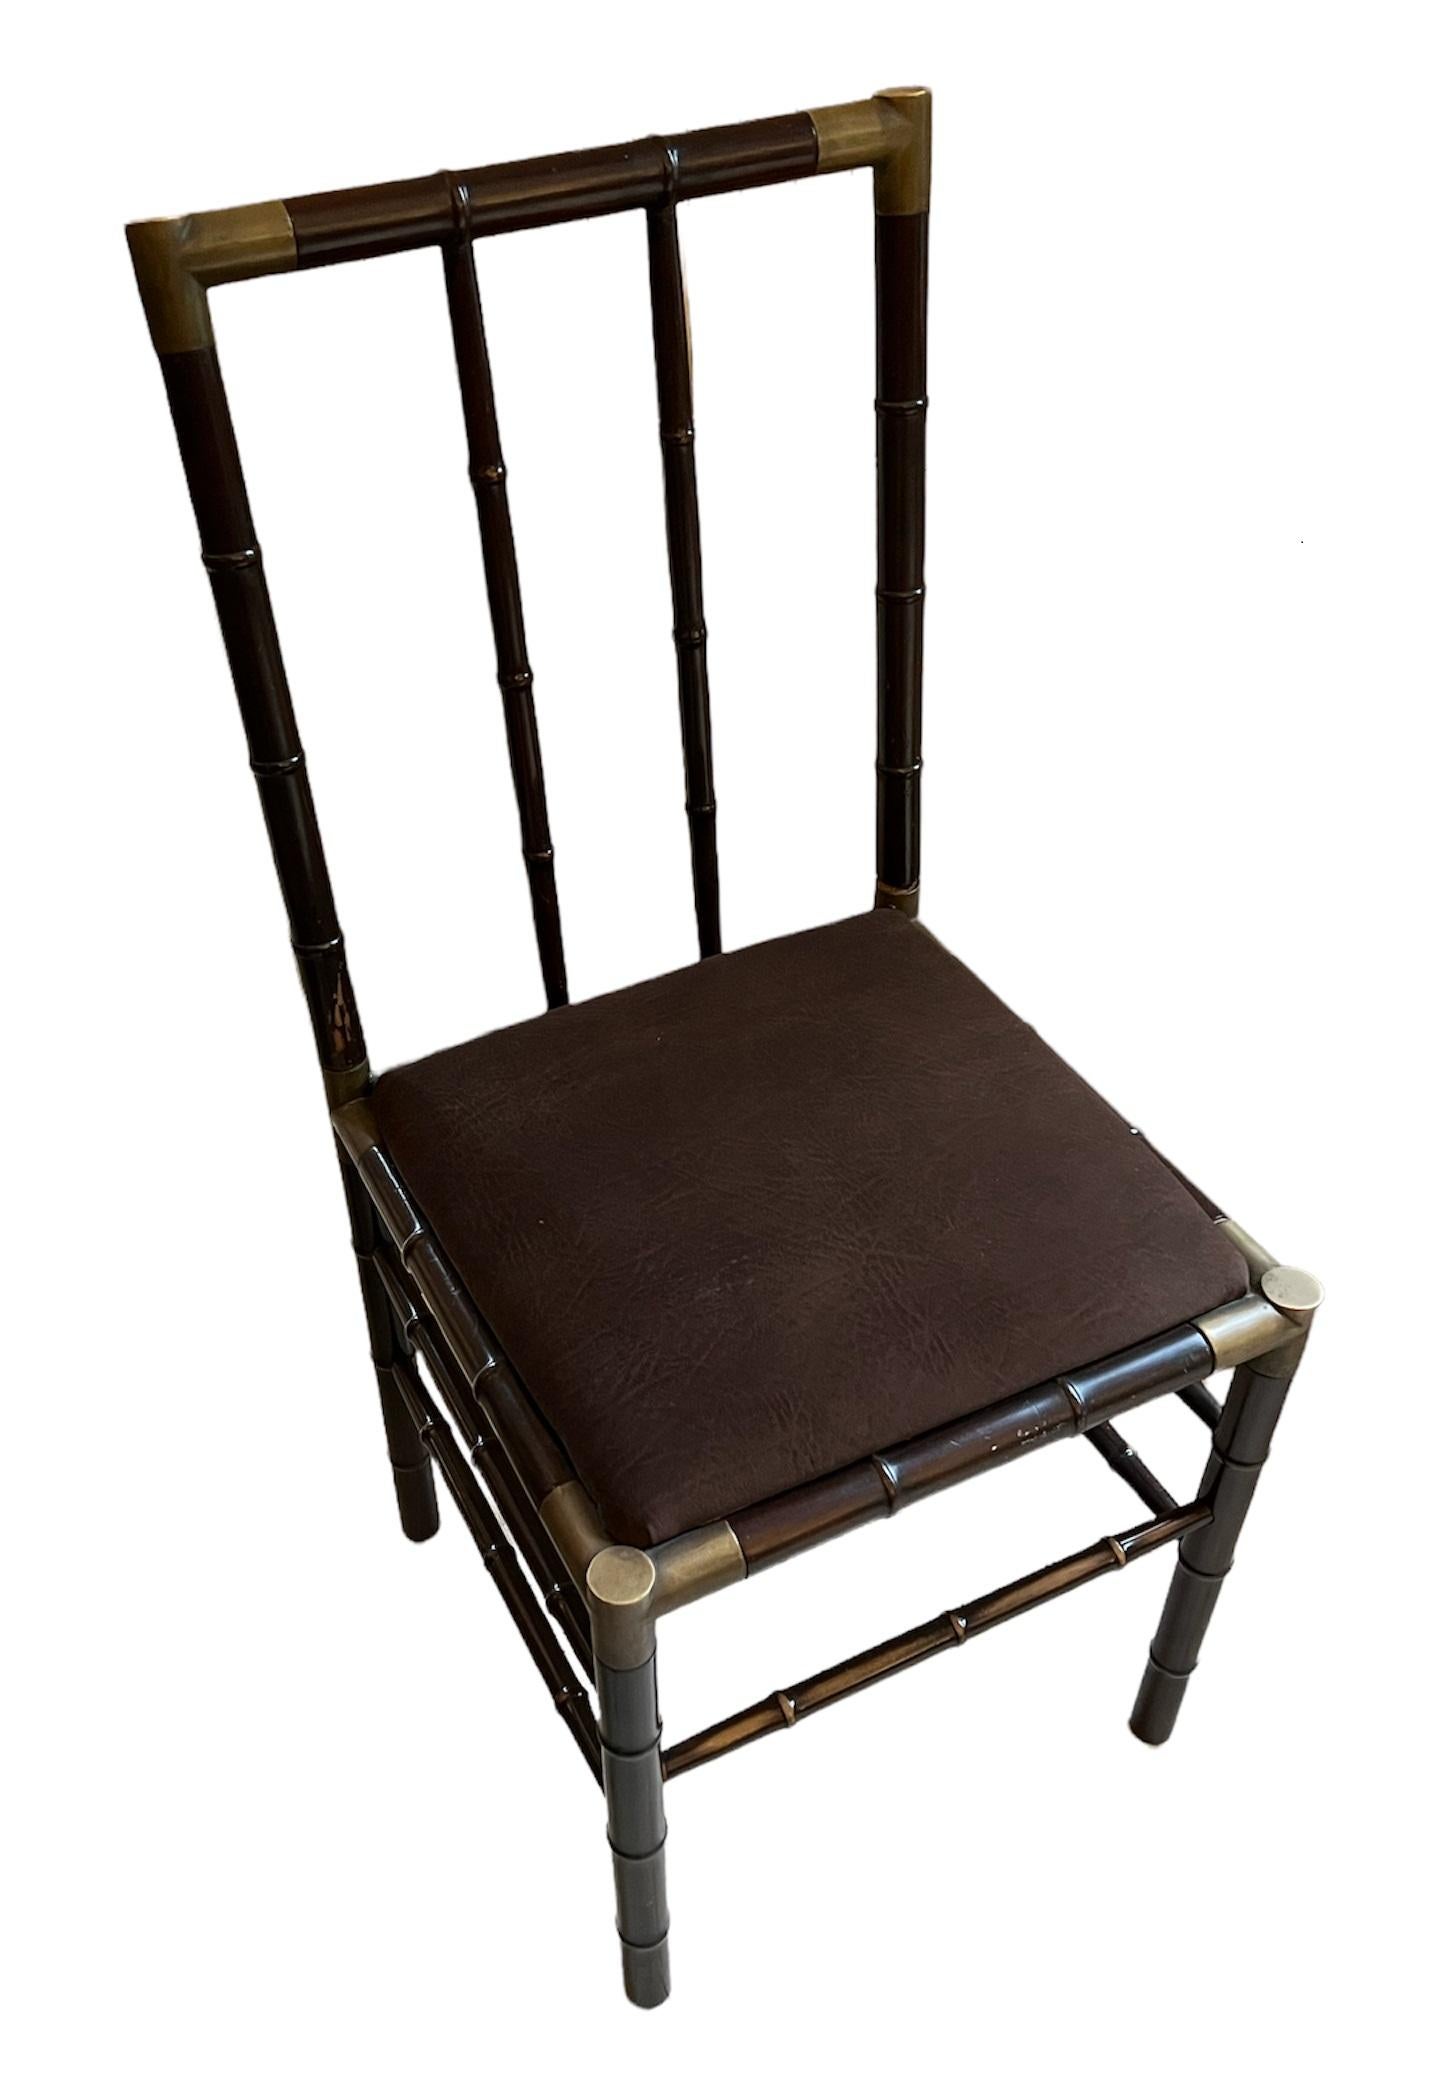 6 Chairs
Material: Wood and bronze
Style: Hollywood
American
We have specialized in the sale of Art Deco and Art Nouveau and Vintage styles since 1982.If you have any questions we are at your disposal.
Pushing the button that reads 'View All From